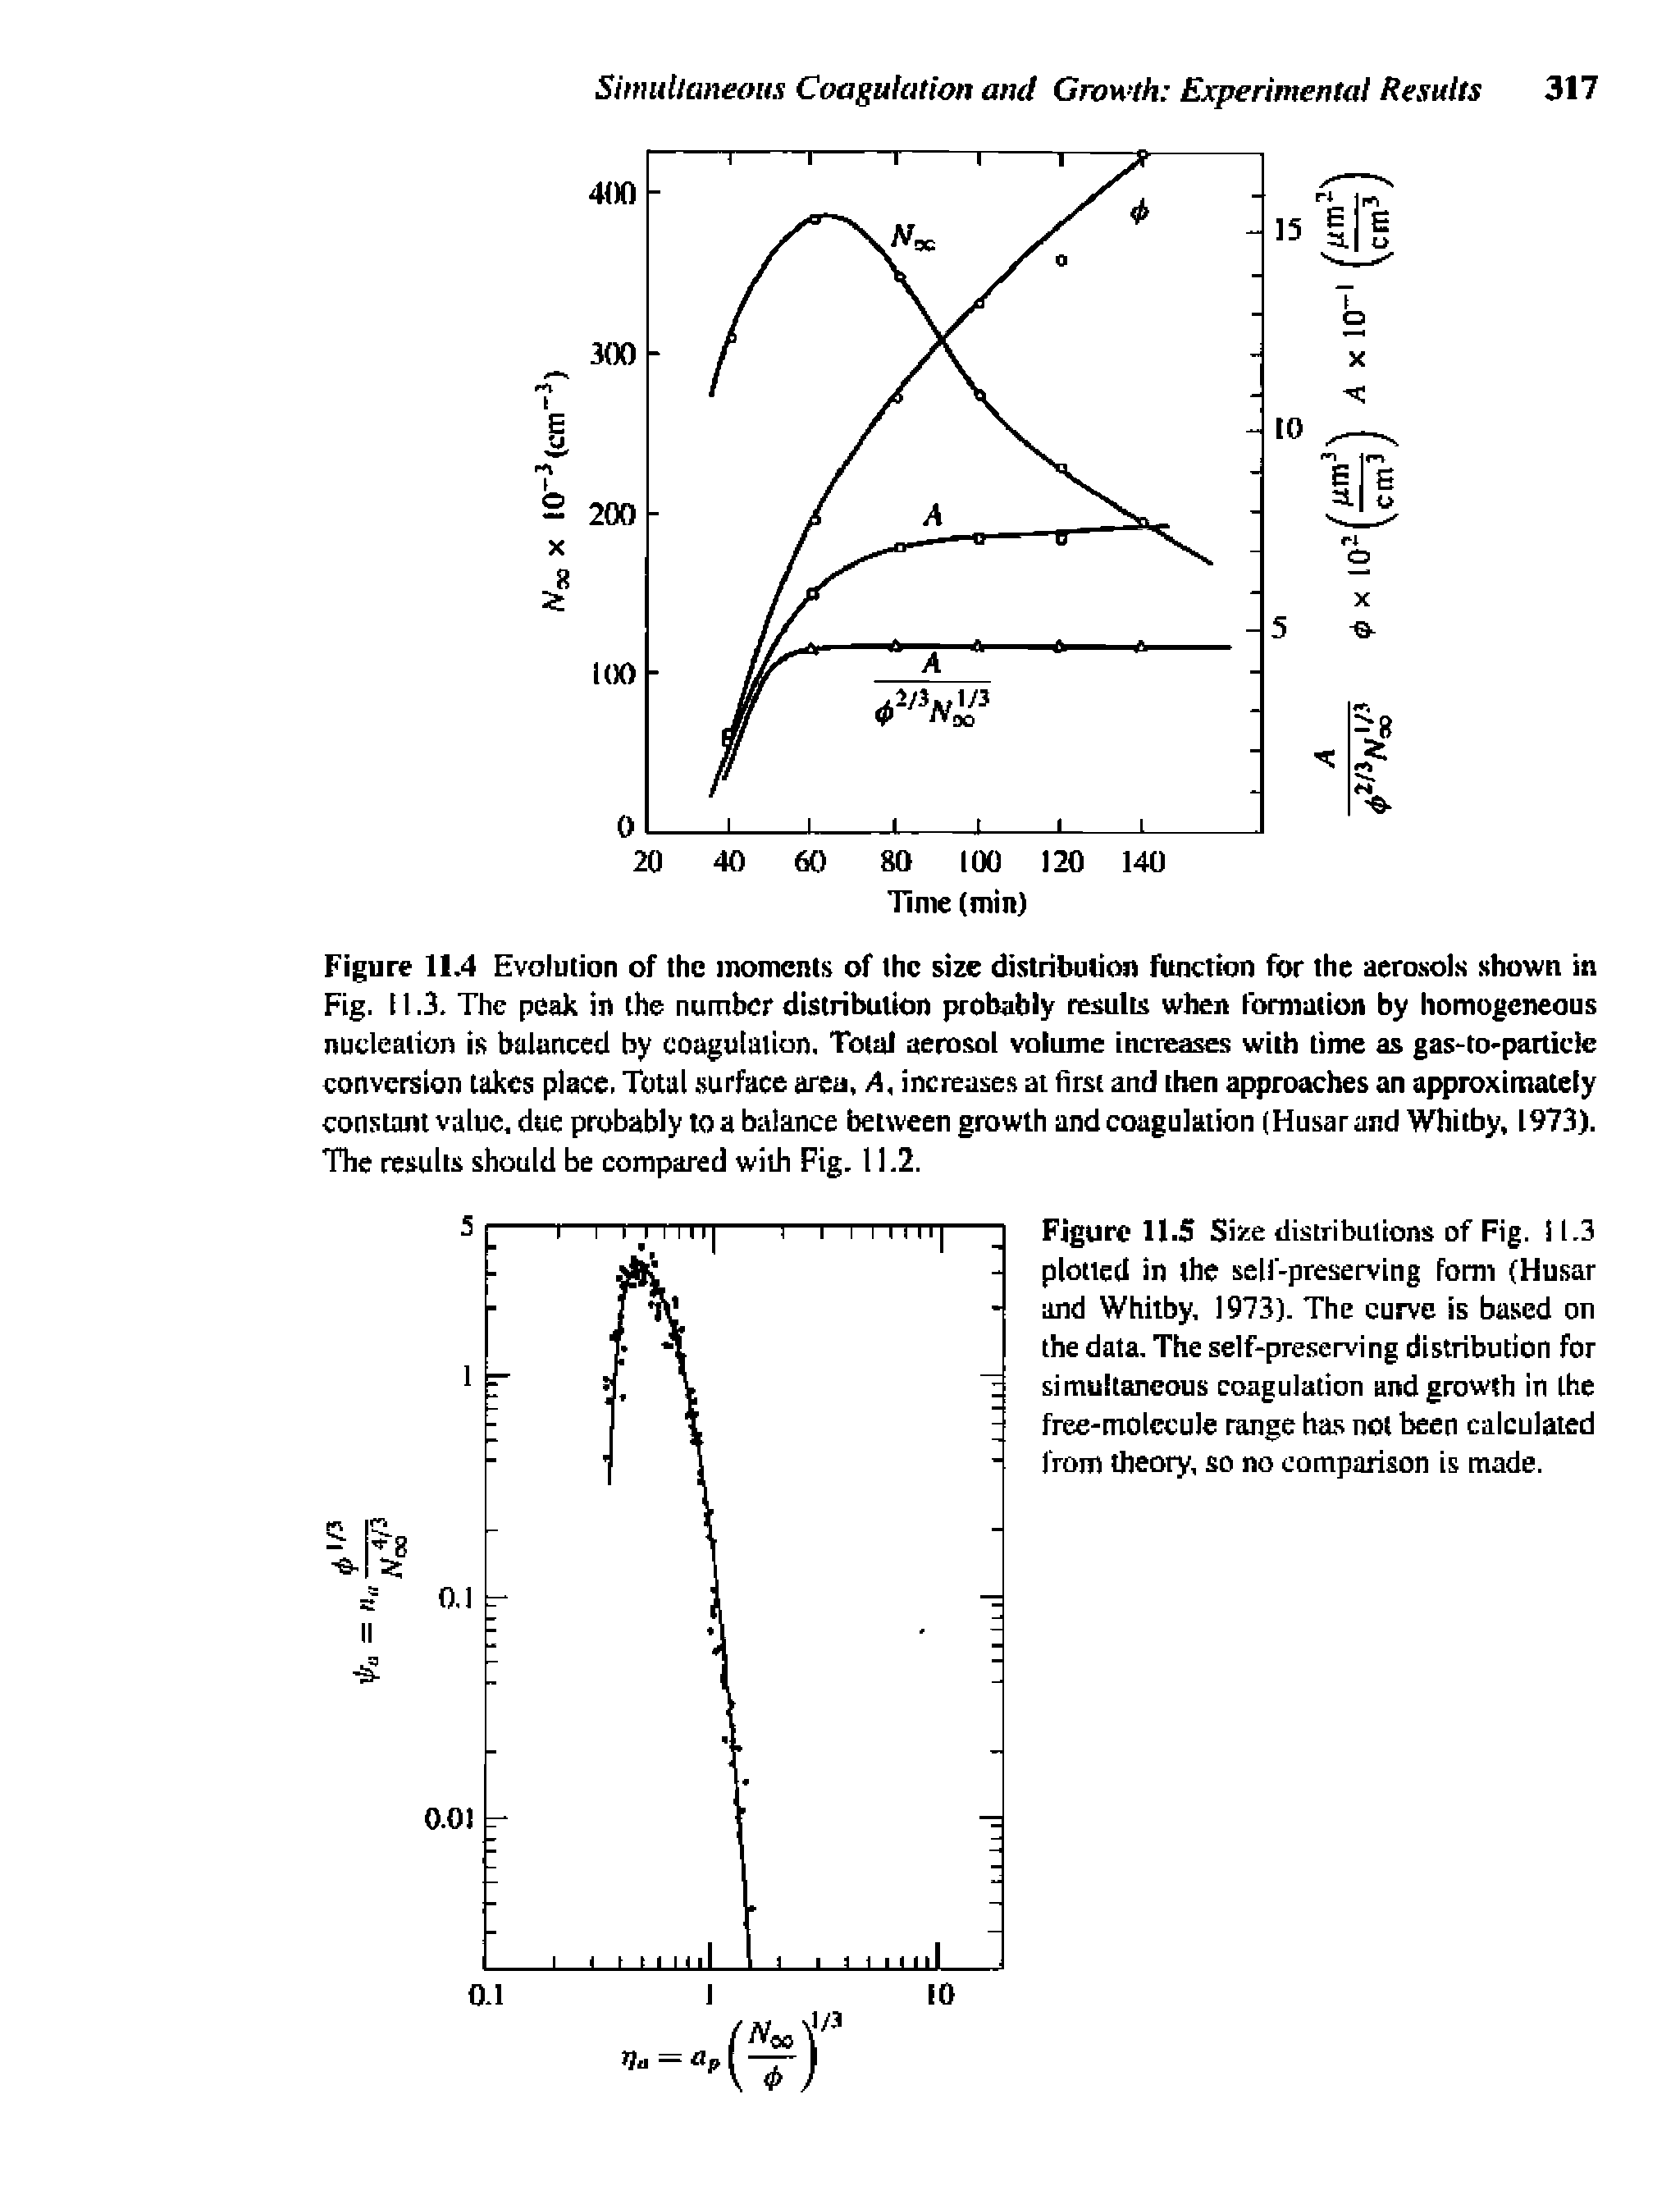 Figure 11.4 Evolution of the moments of the size distribution function for the aerosols shown in Fig. 11.3, The peak in the number distribution probably results when formation by homogeneous nudeaiiun is balanced by coagulation. Total aerosol volume increases with time as gas-tO partide conversion takes place. Total. surface area, A, increases at first and then approaches an approximately constant value, due probably toa balance between growth and coagulation (Husarand Whitby, 1973). The results should be compared with Pig. 11.2.